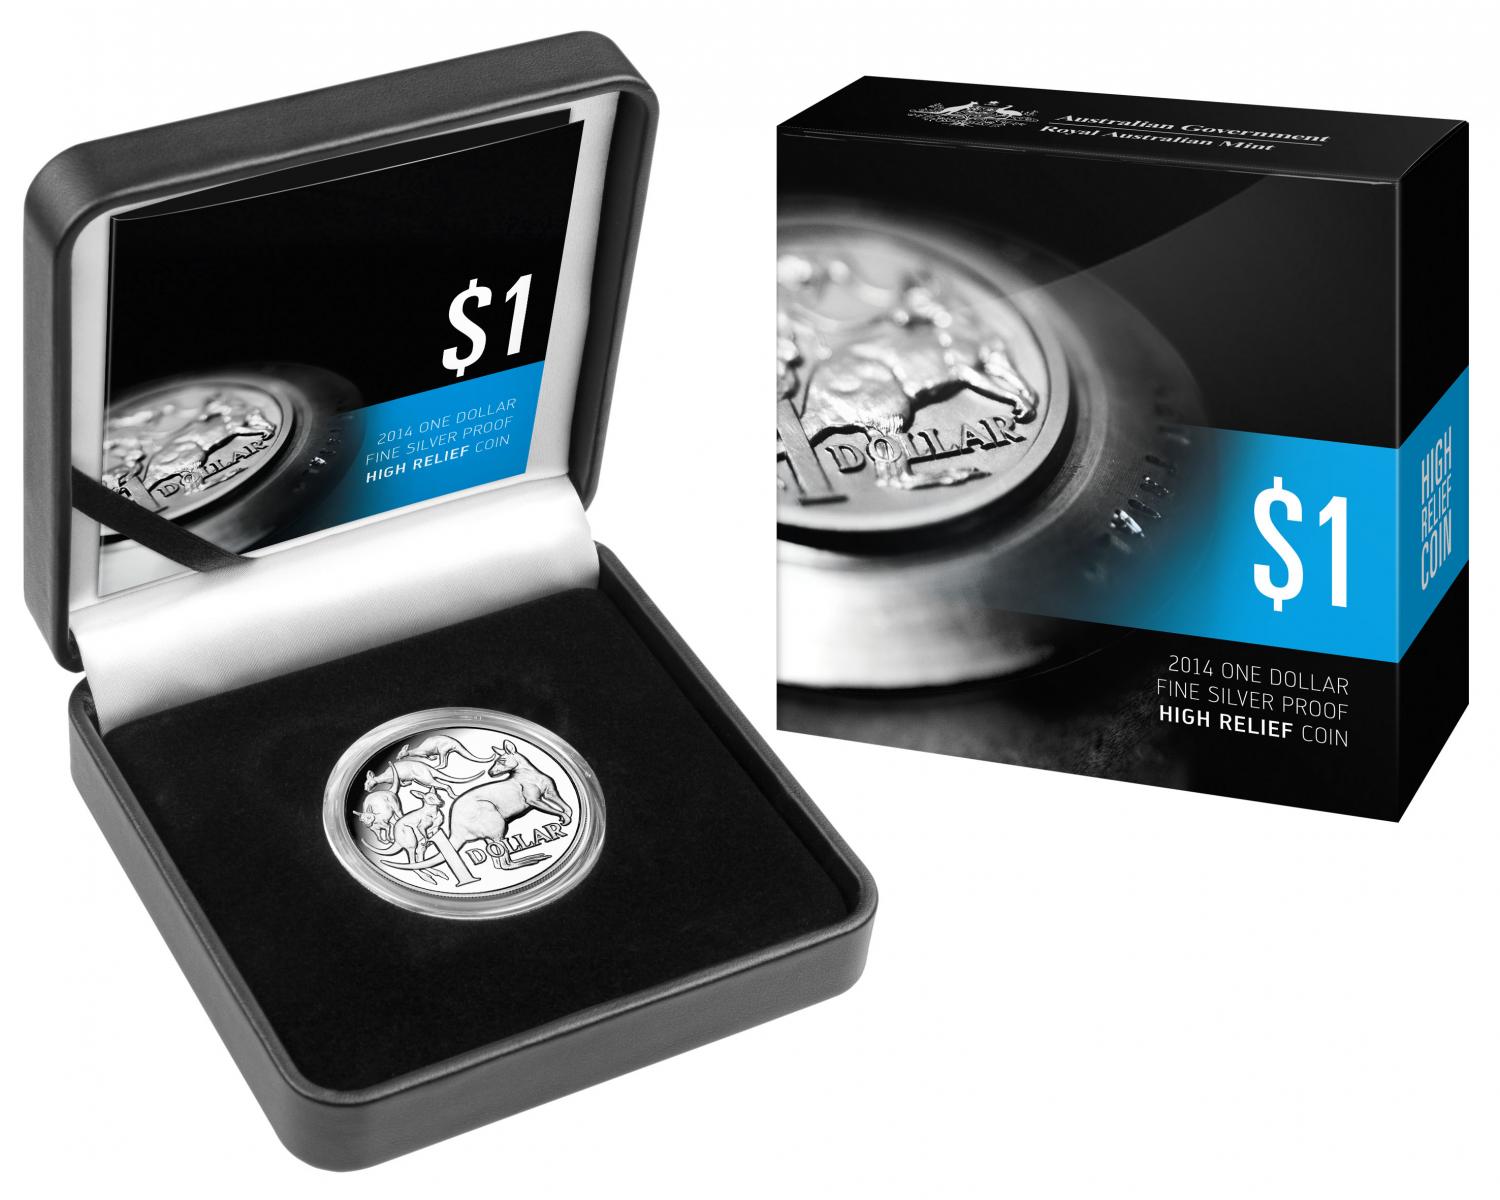 Thumbnail for 2014 One Dollar 1oz Silver Proof High Relief Coin - 30th Anniversary of the Dollar Coin